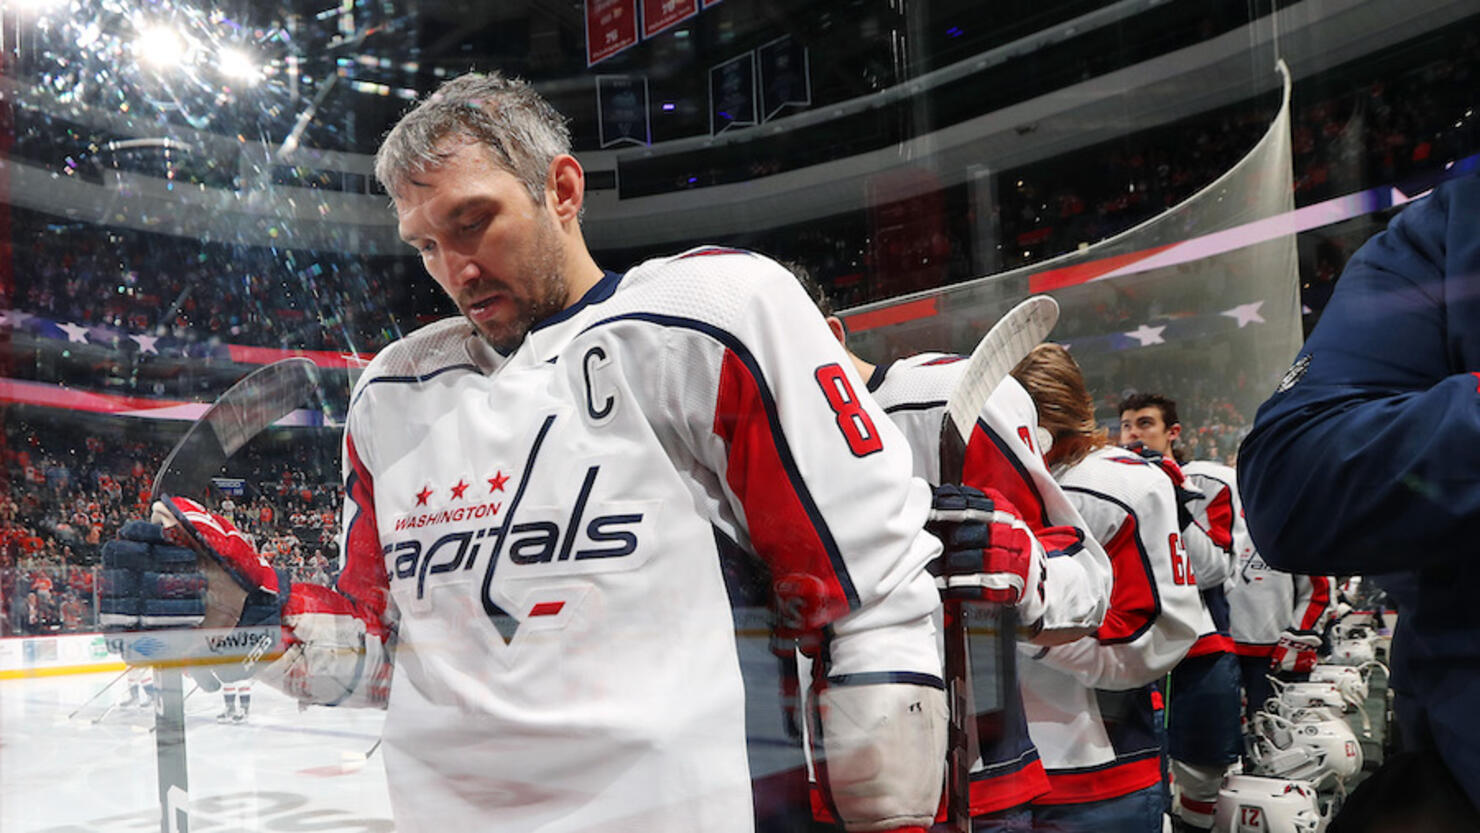 Report: Ovechkin to join Team Russia at worlds